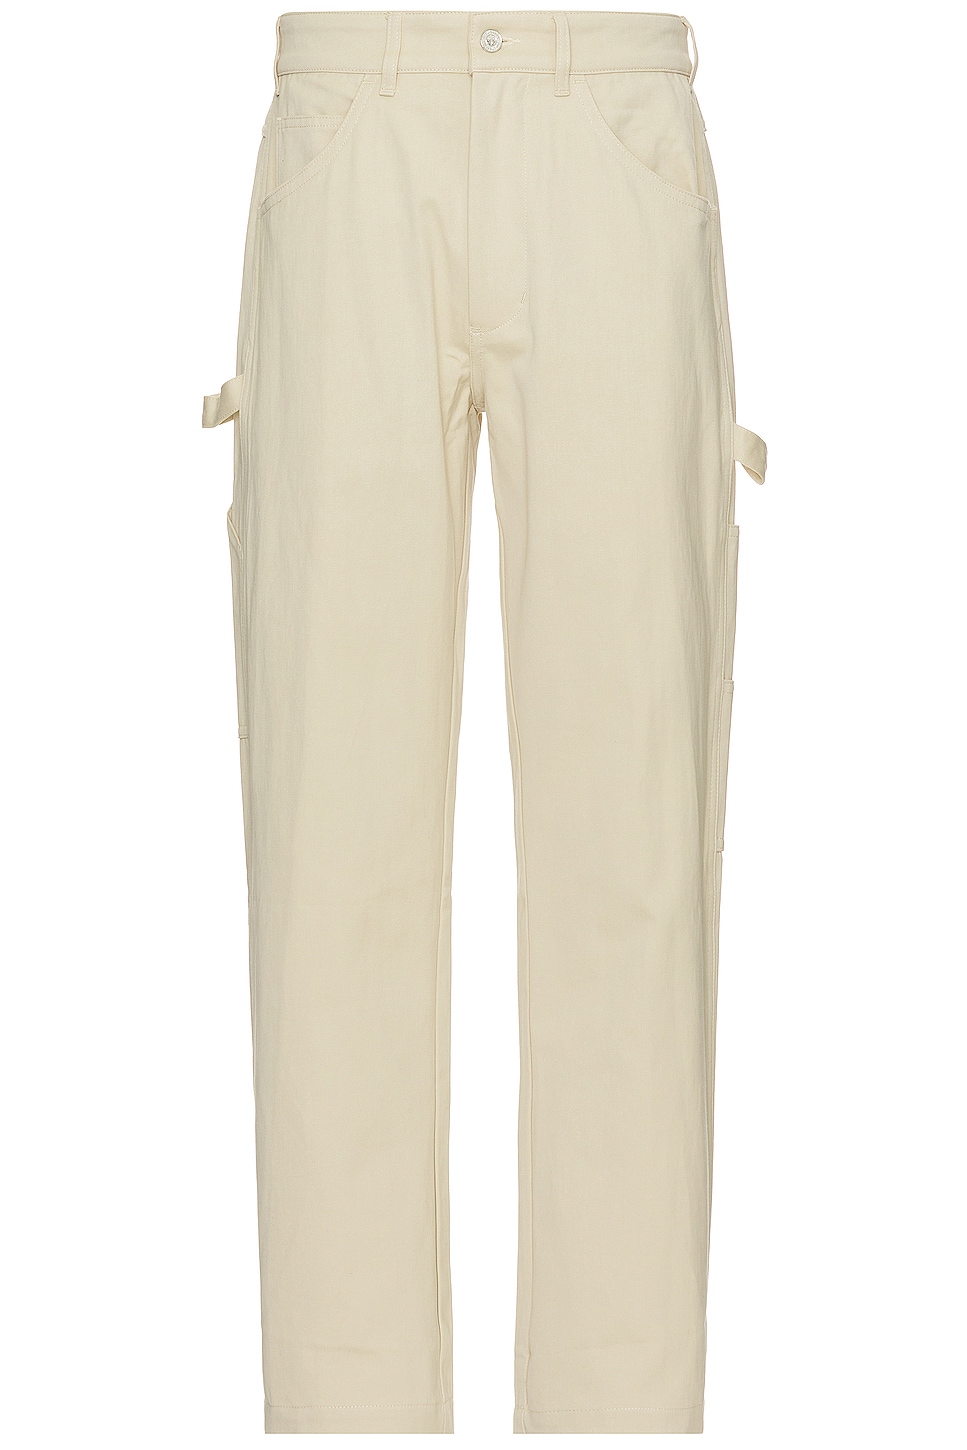 Image 1 of Mister Green Utility Pant in Vintage White